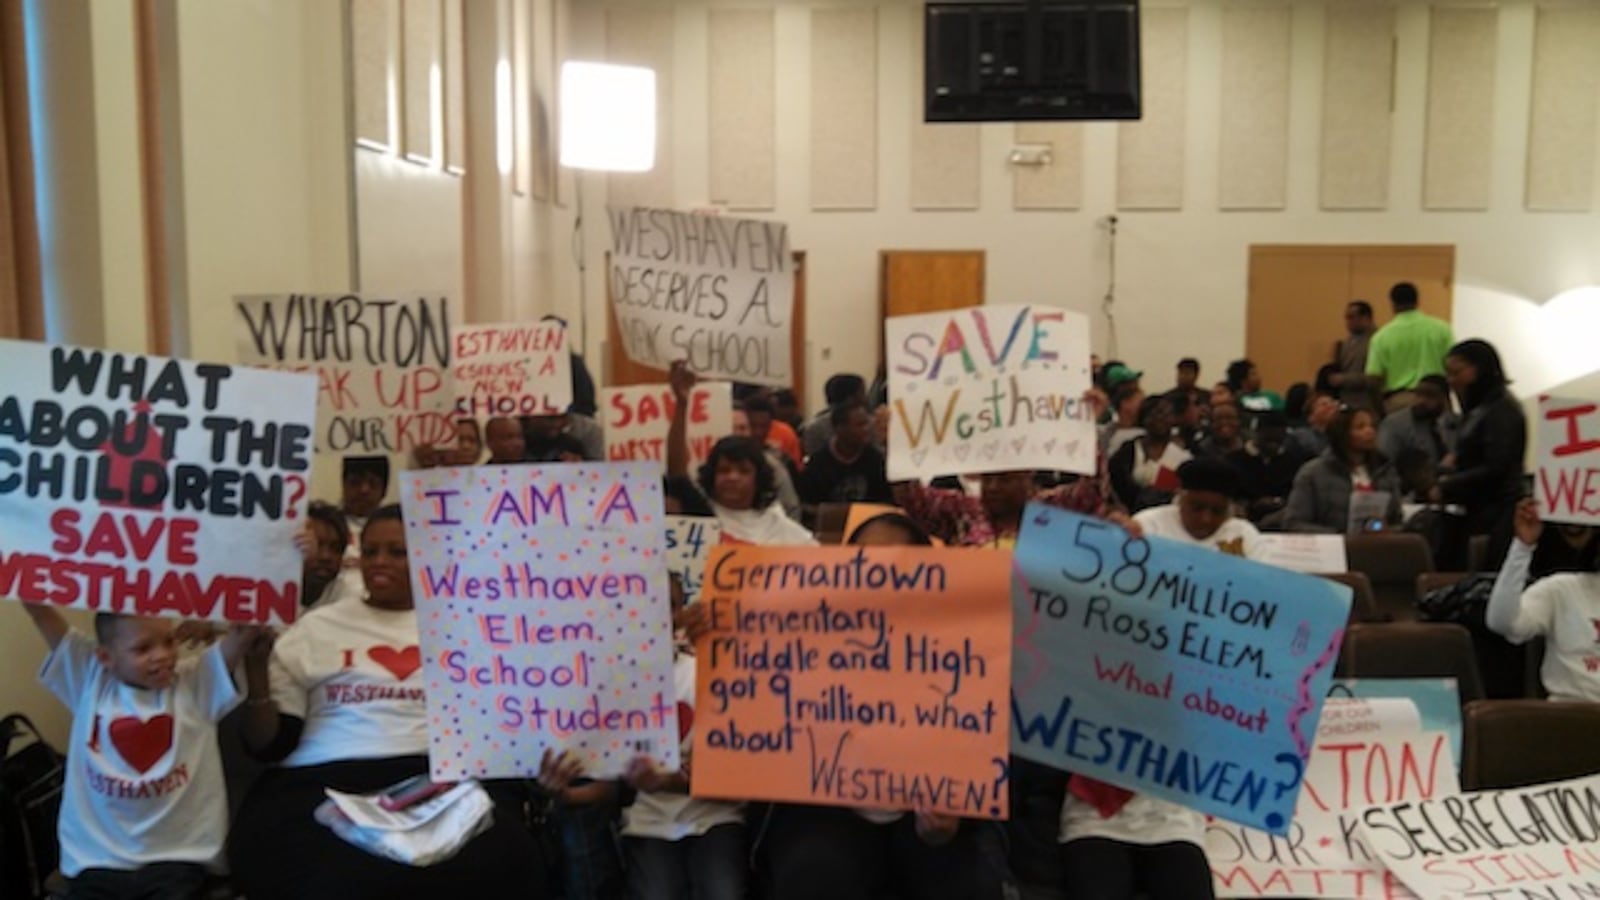 Westhaven supporters arrived early Tuesday evening protest the school's closure.